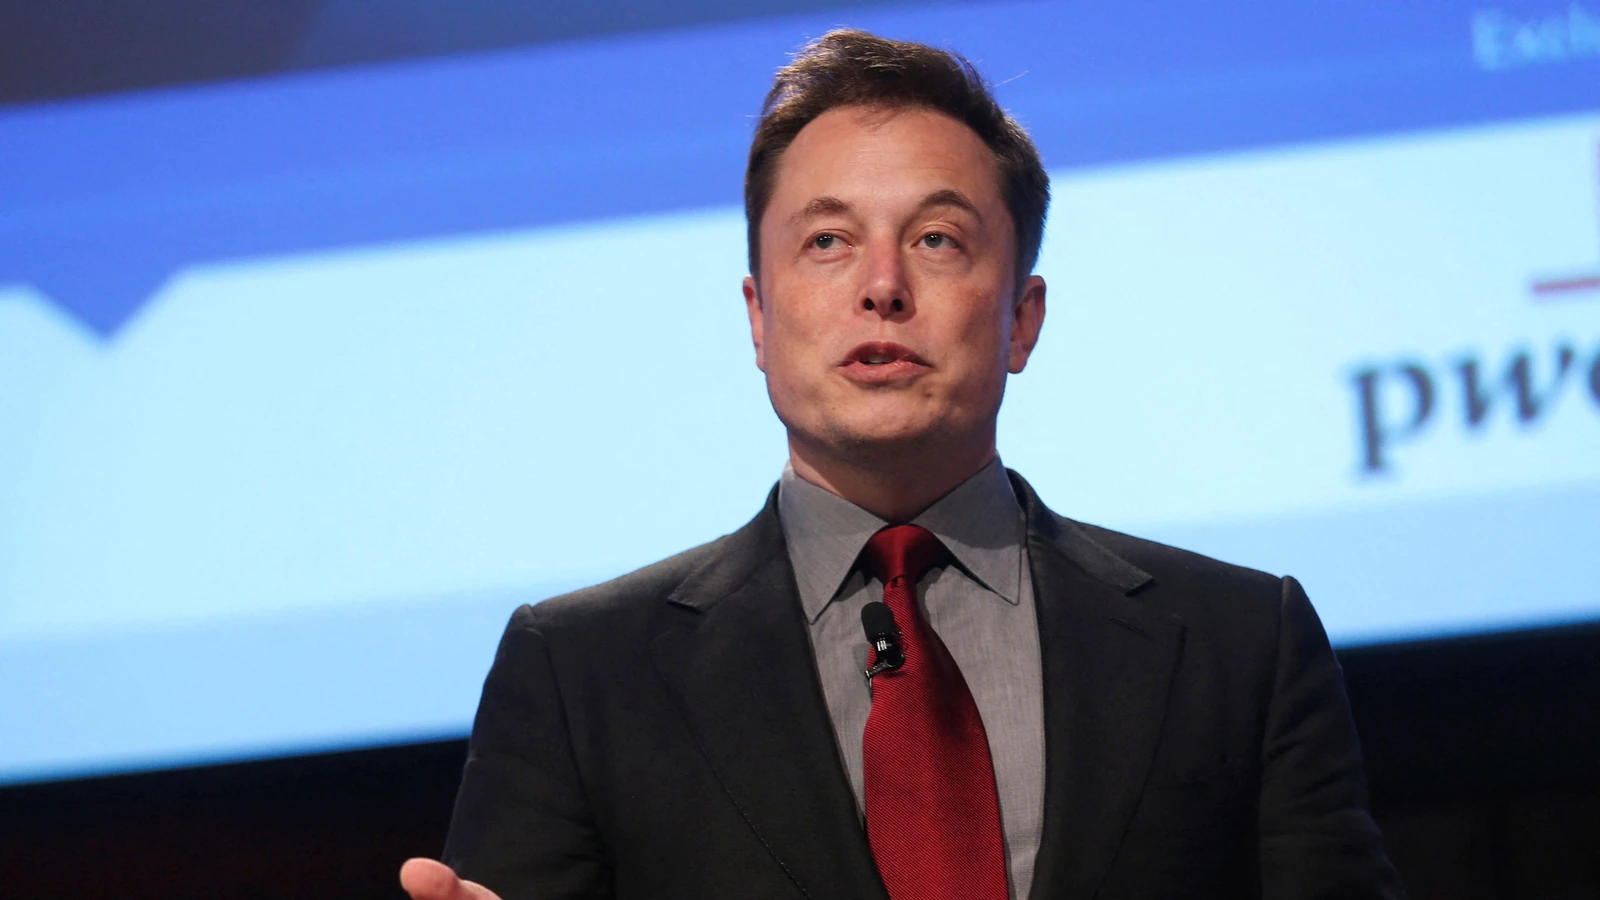 Elon Musk says Starlink will seek exemption to Iranian sanctions